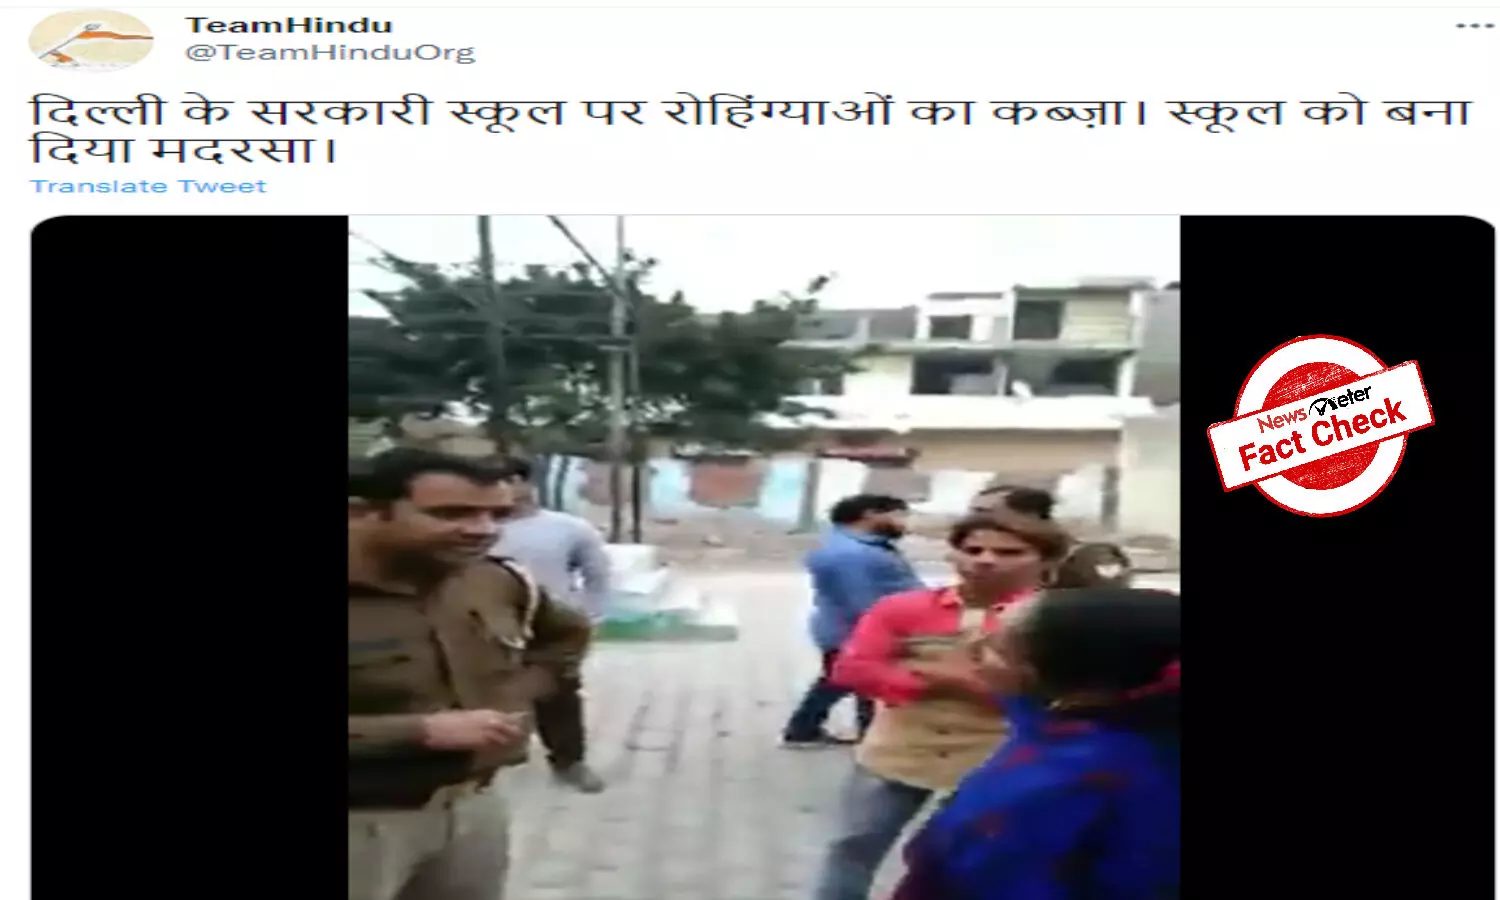 Fact Check: School video is not from Delhi, but Ghaziabad